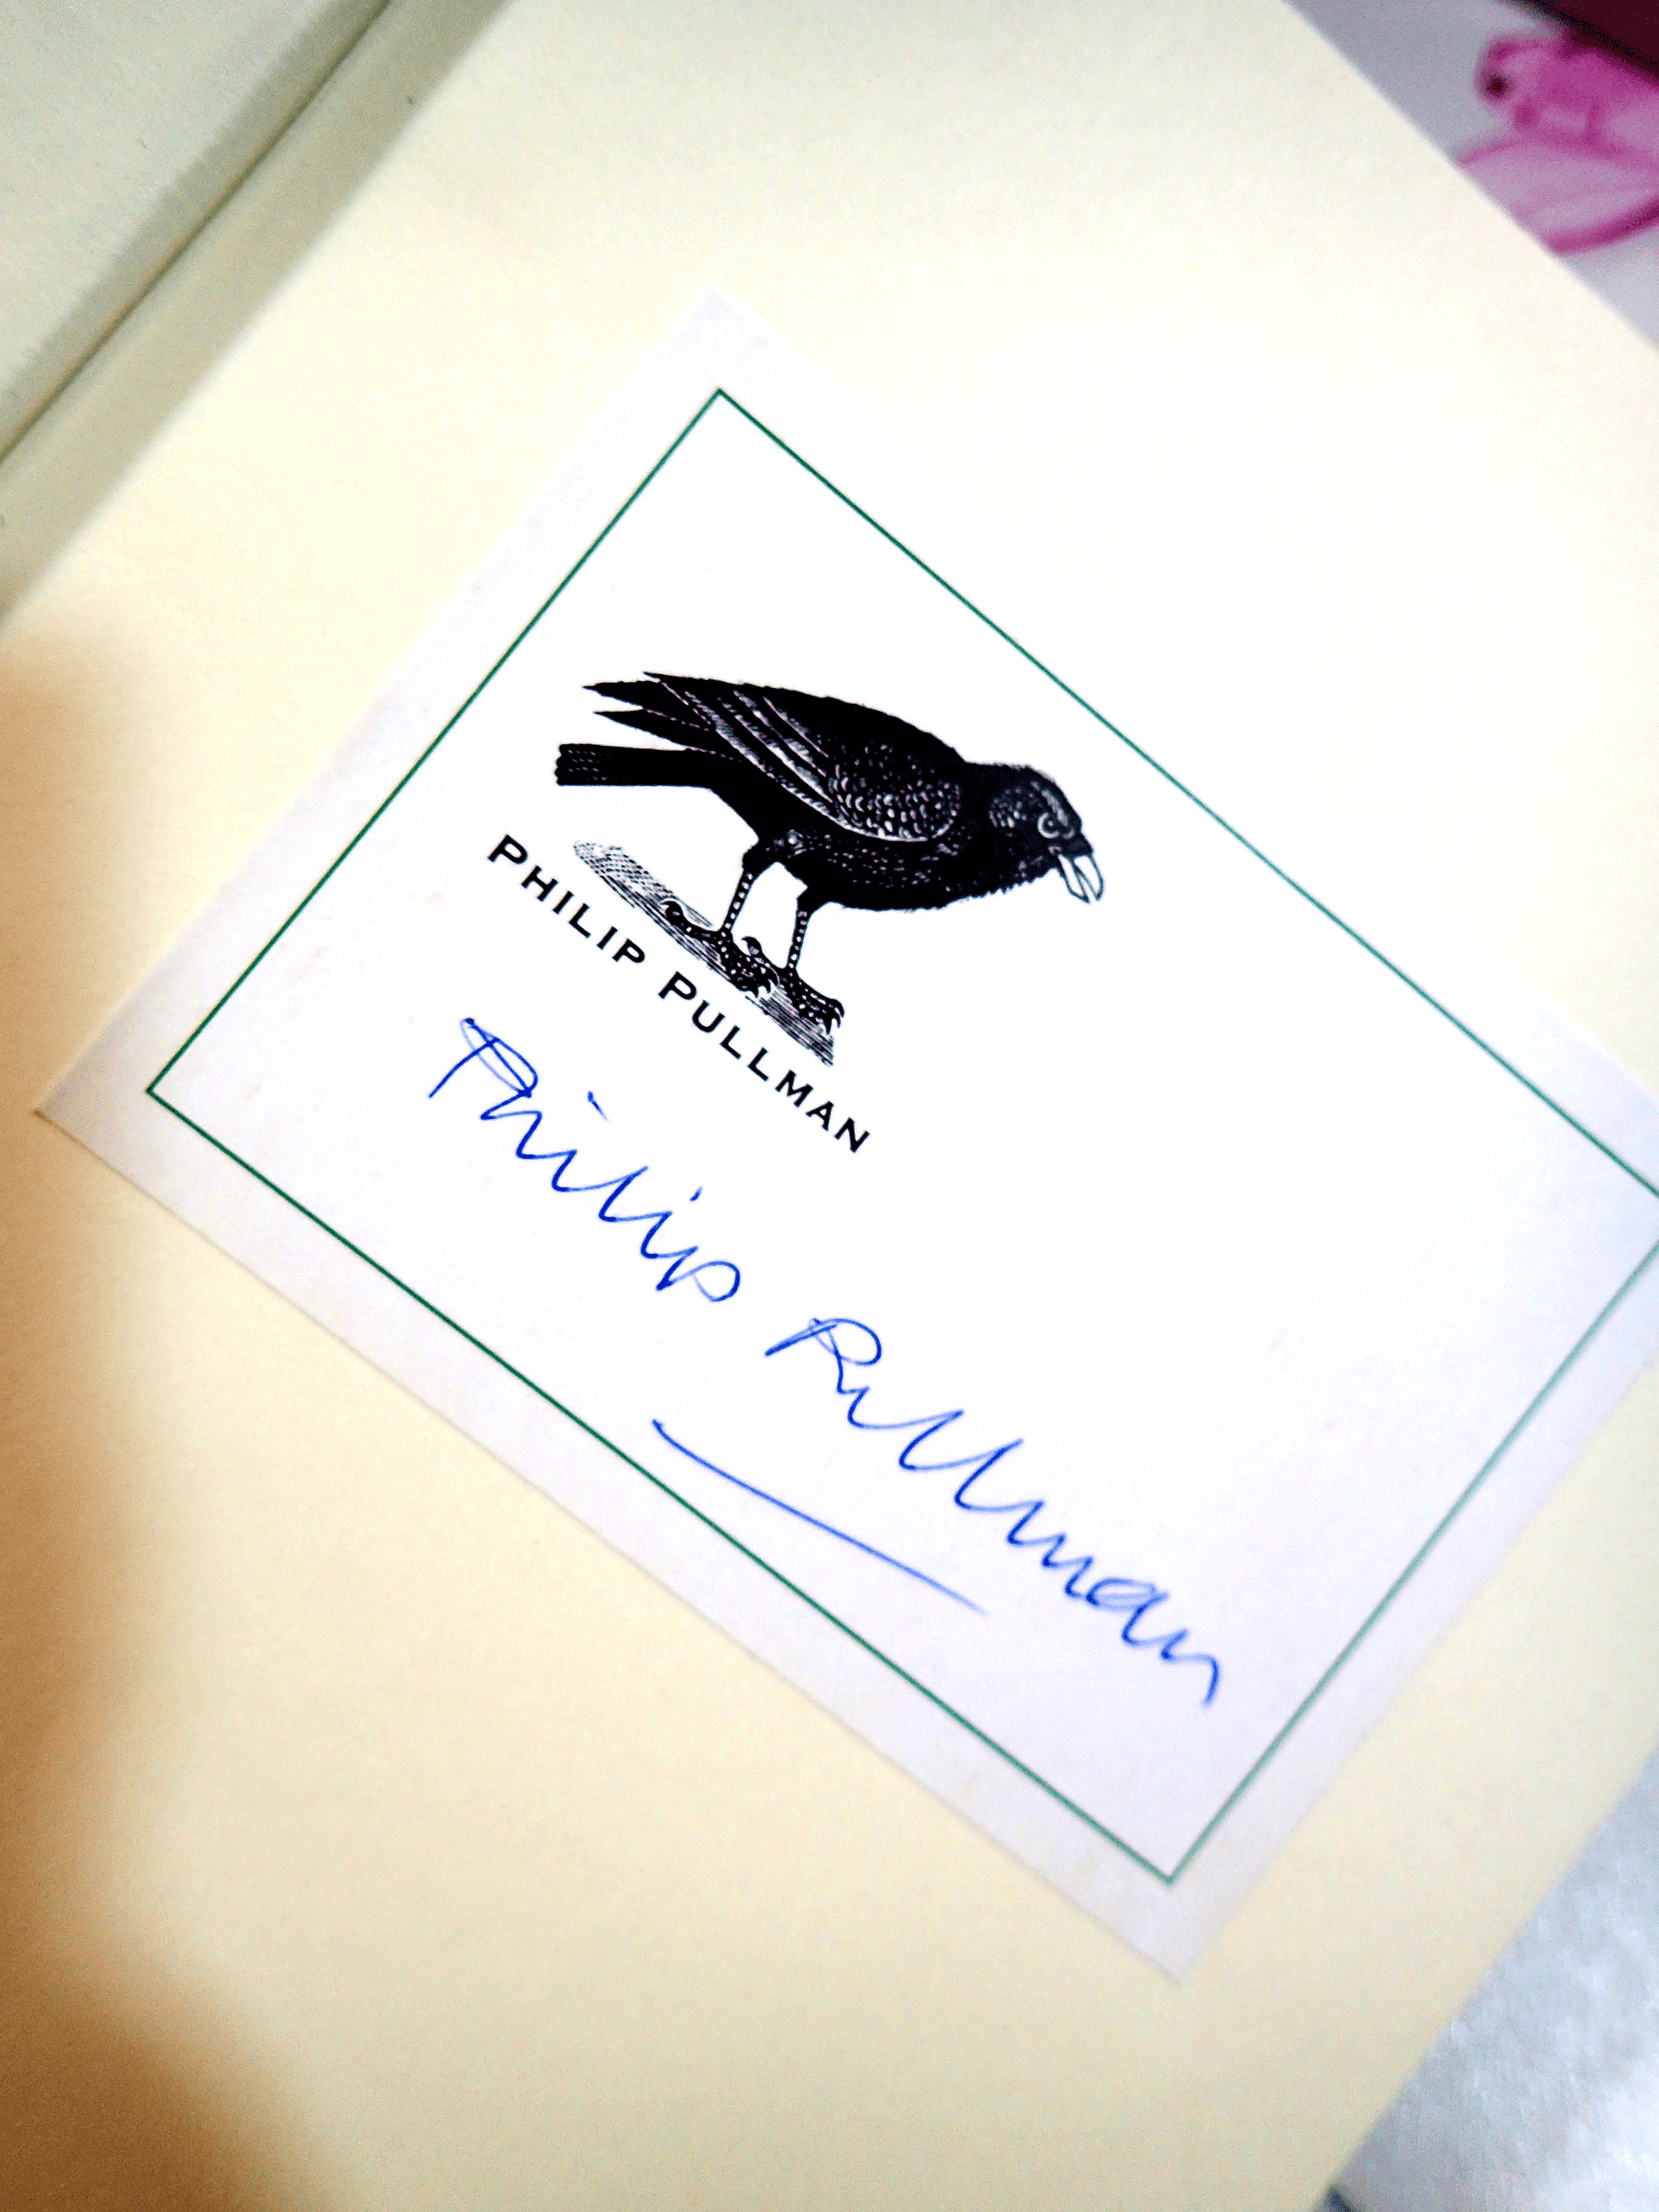 His Dark Materials Omnibus Philip Pullman Science Fiction Book Club First Edition Scarce Signed Bookplate with Raven